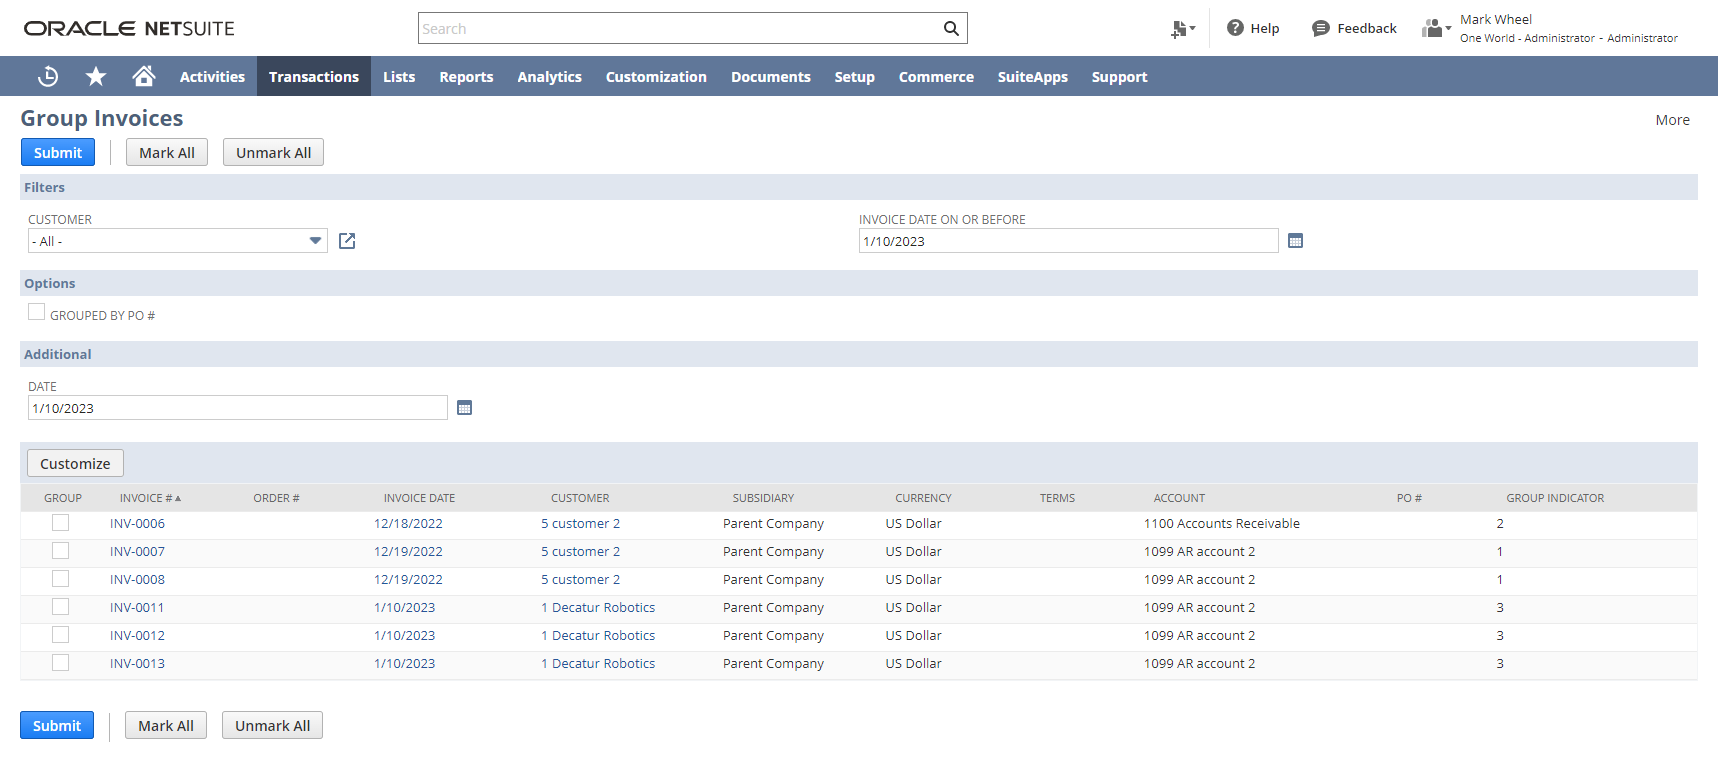 Group invoices page showing the list of available invoices ready for grouping